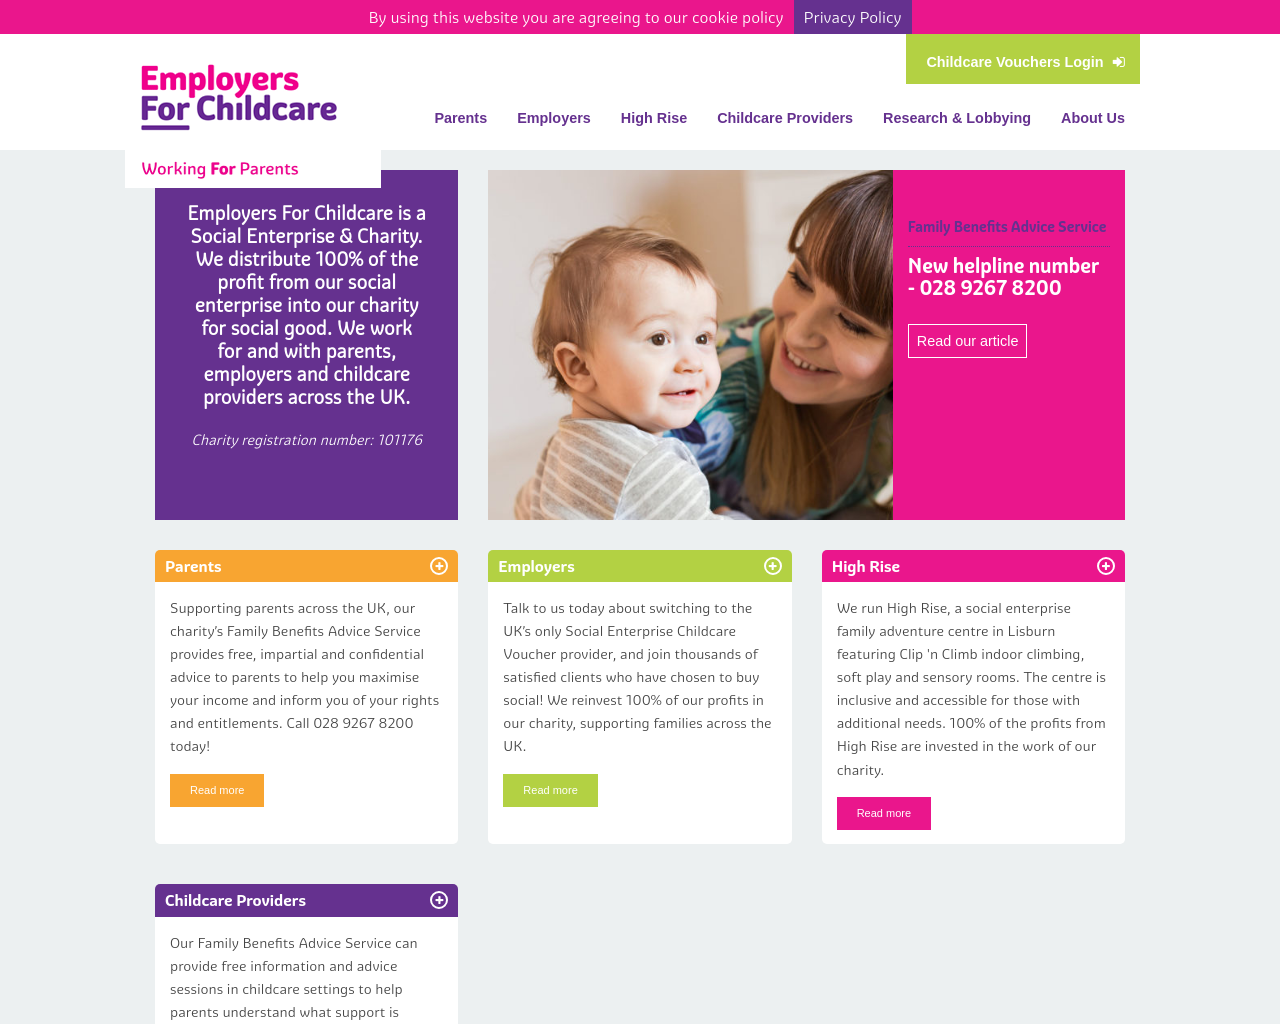 Employer For Childcare